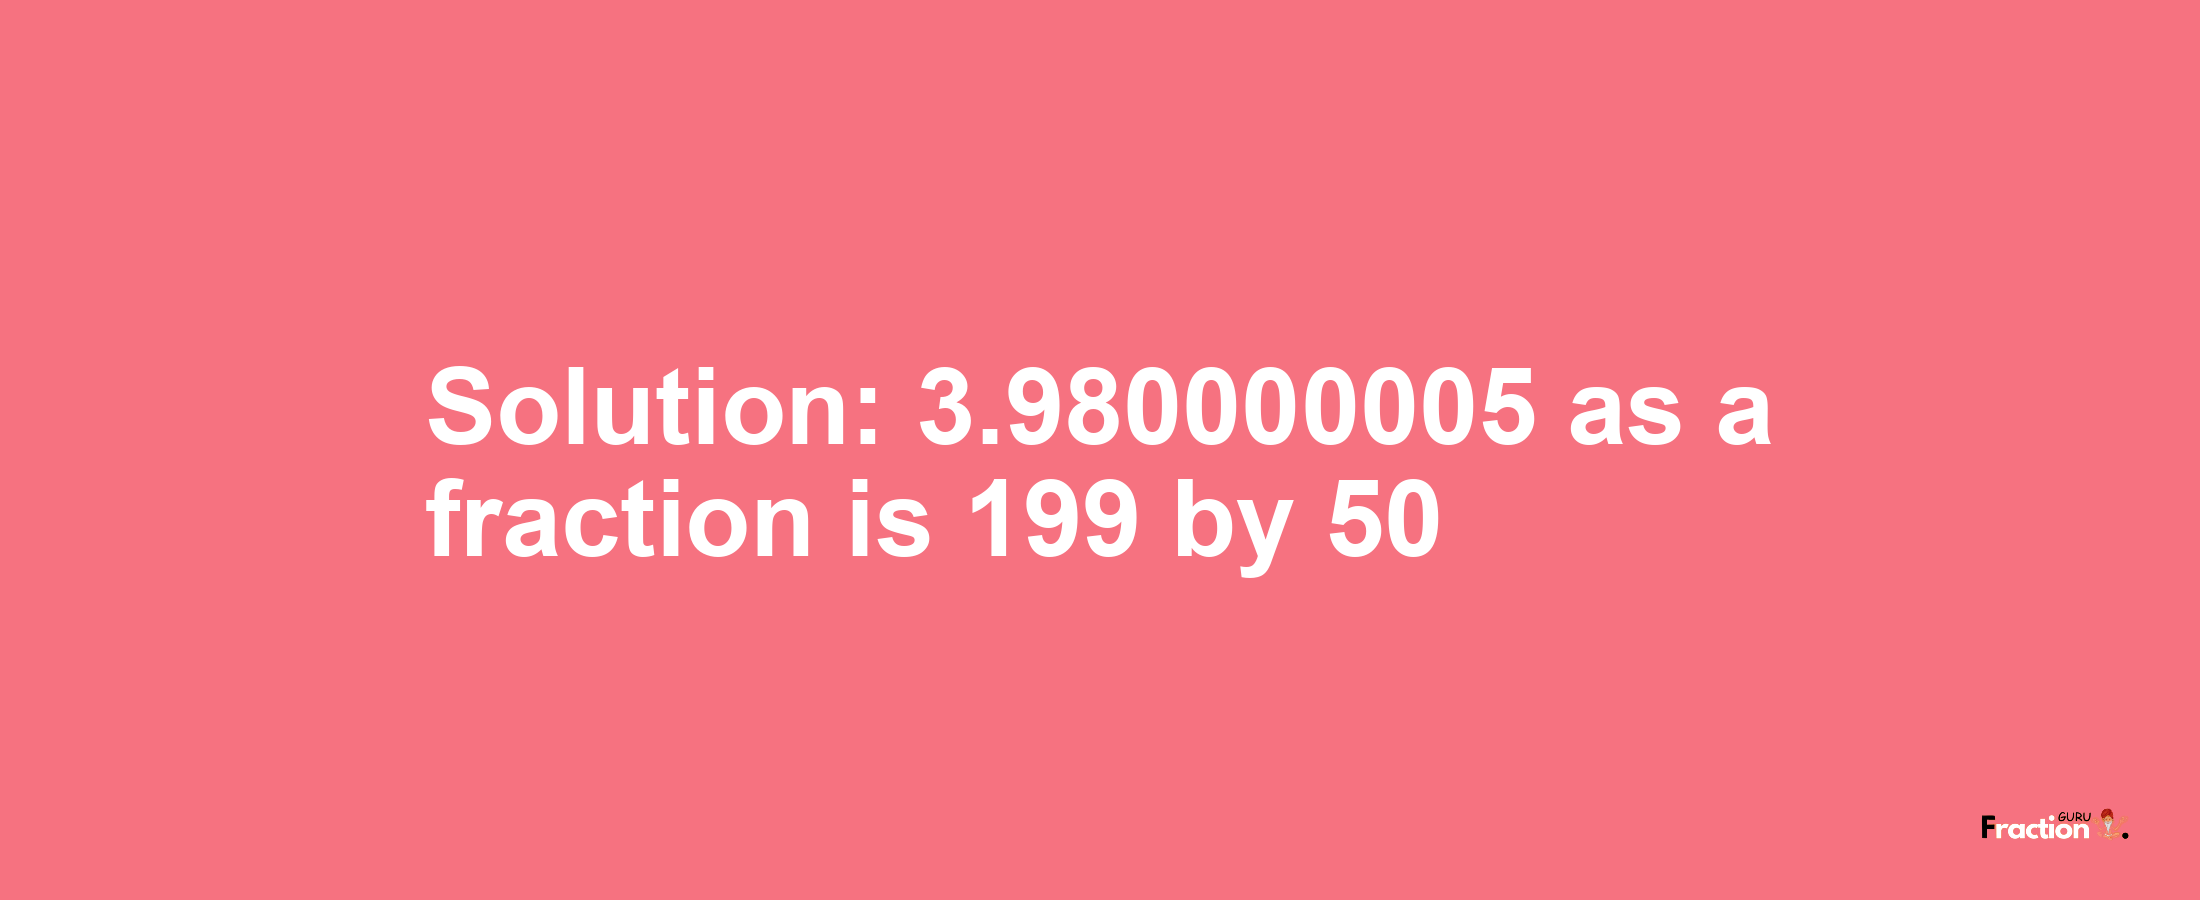 Solution:3.980000005 as a fraction is 199/50